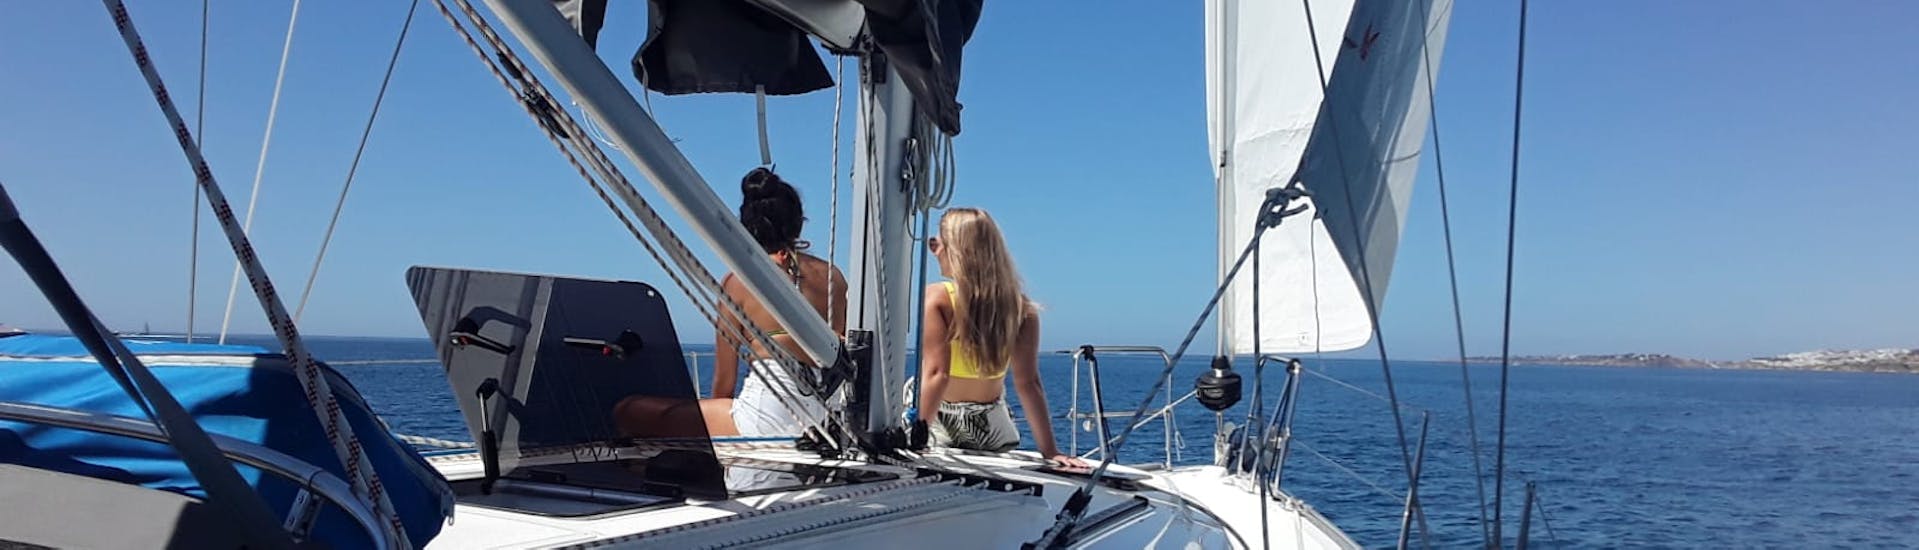 Two women sitting on the boat during the Private Boat Trip from Cascais with Palmayachts Charters Portugal.